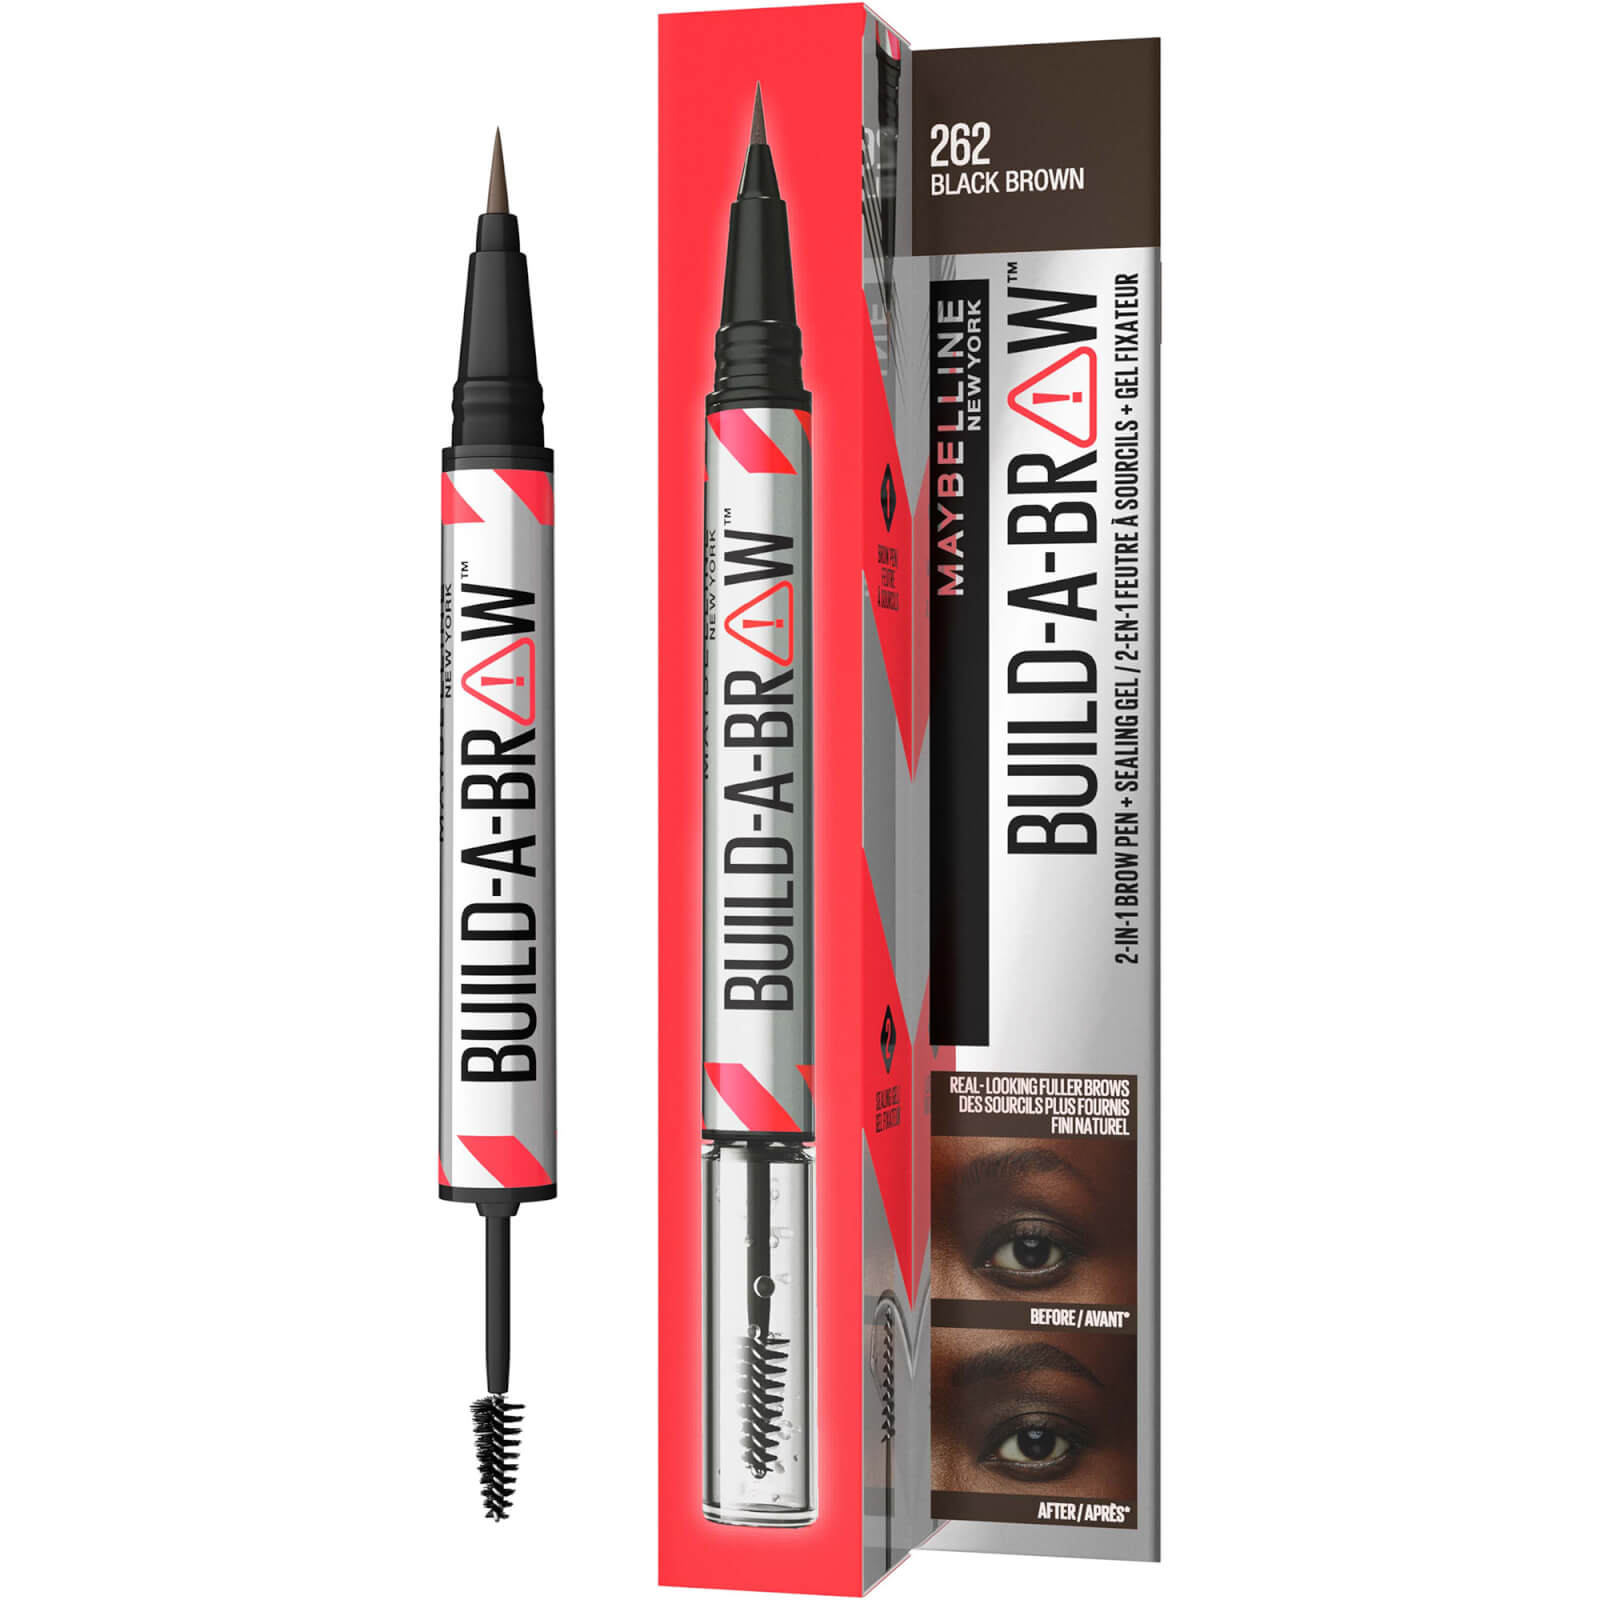 Image of Maybelline Build-A-Brow 2 Easy Steps Eye Brow Pencil and Gel (Various Shades) - Black Brown